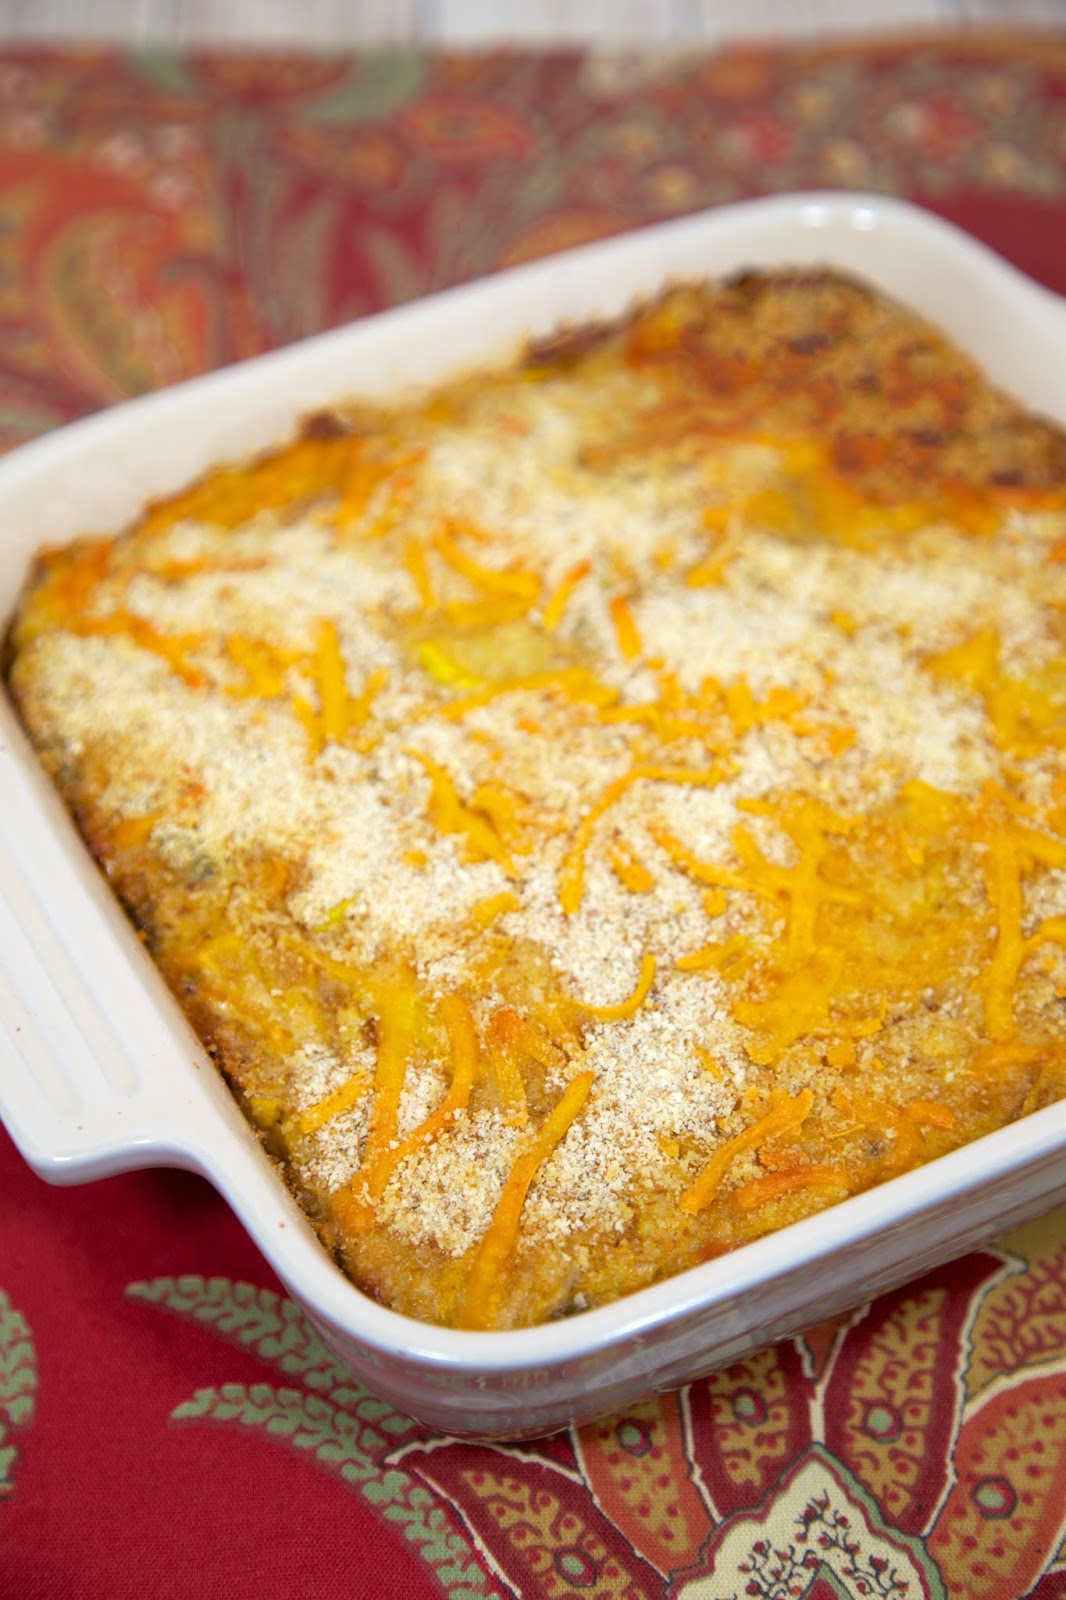 Squash Casserole - squash, peppers, onions, cheese - a family tradition at Thanksgiving! Can make ahead of time and refrigerate until ready to bake.